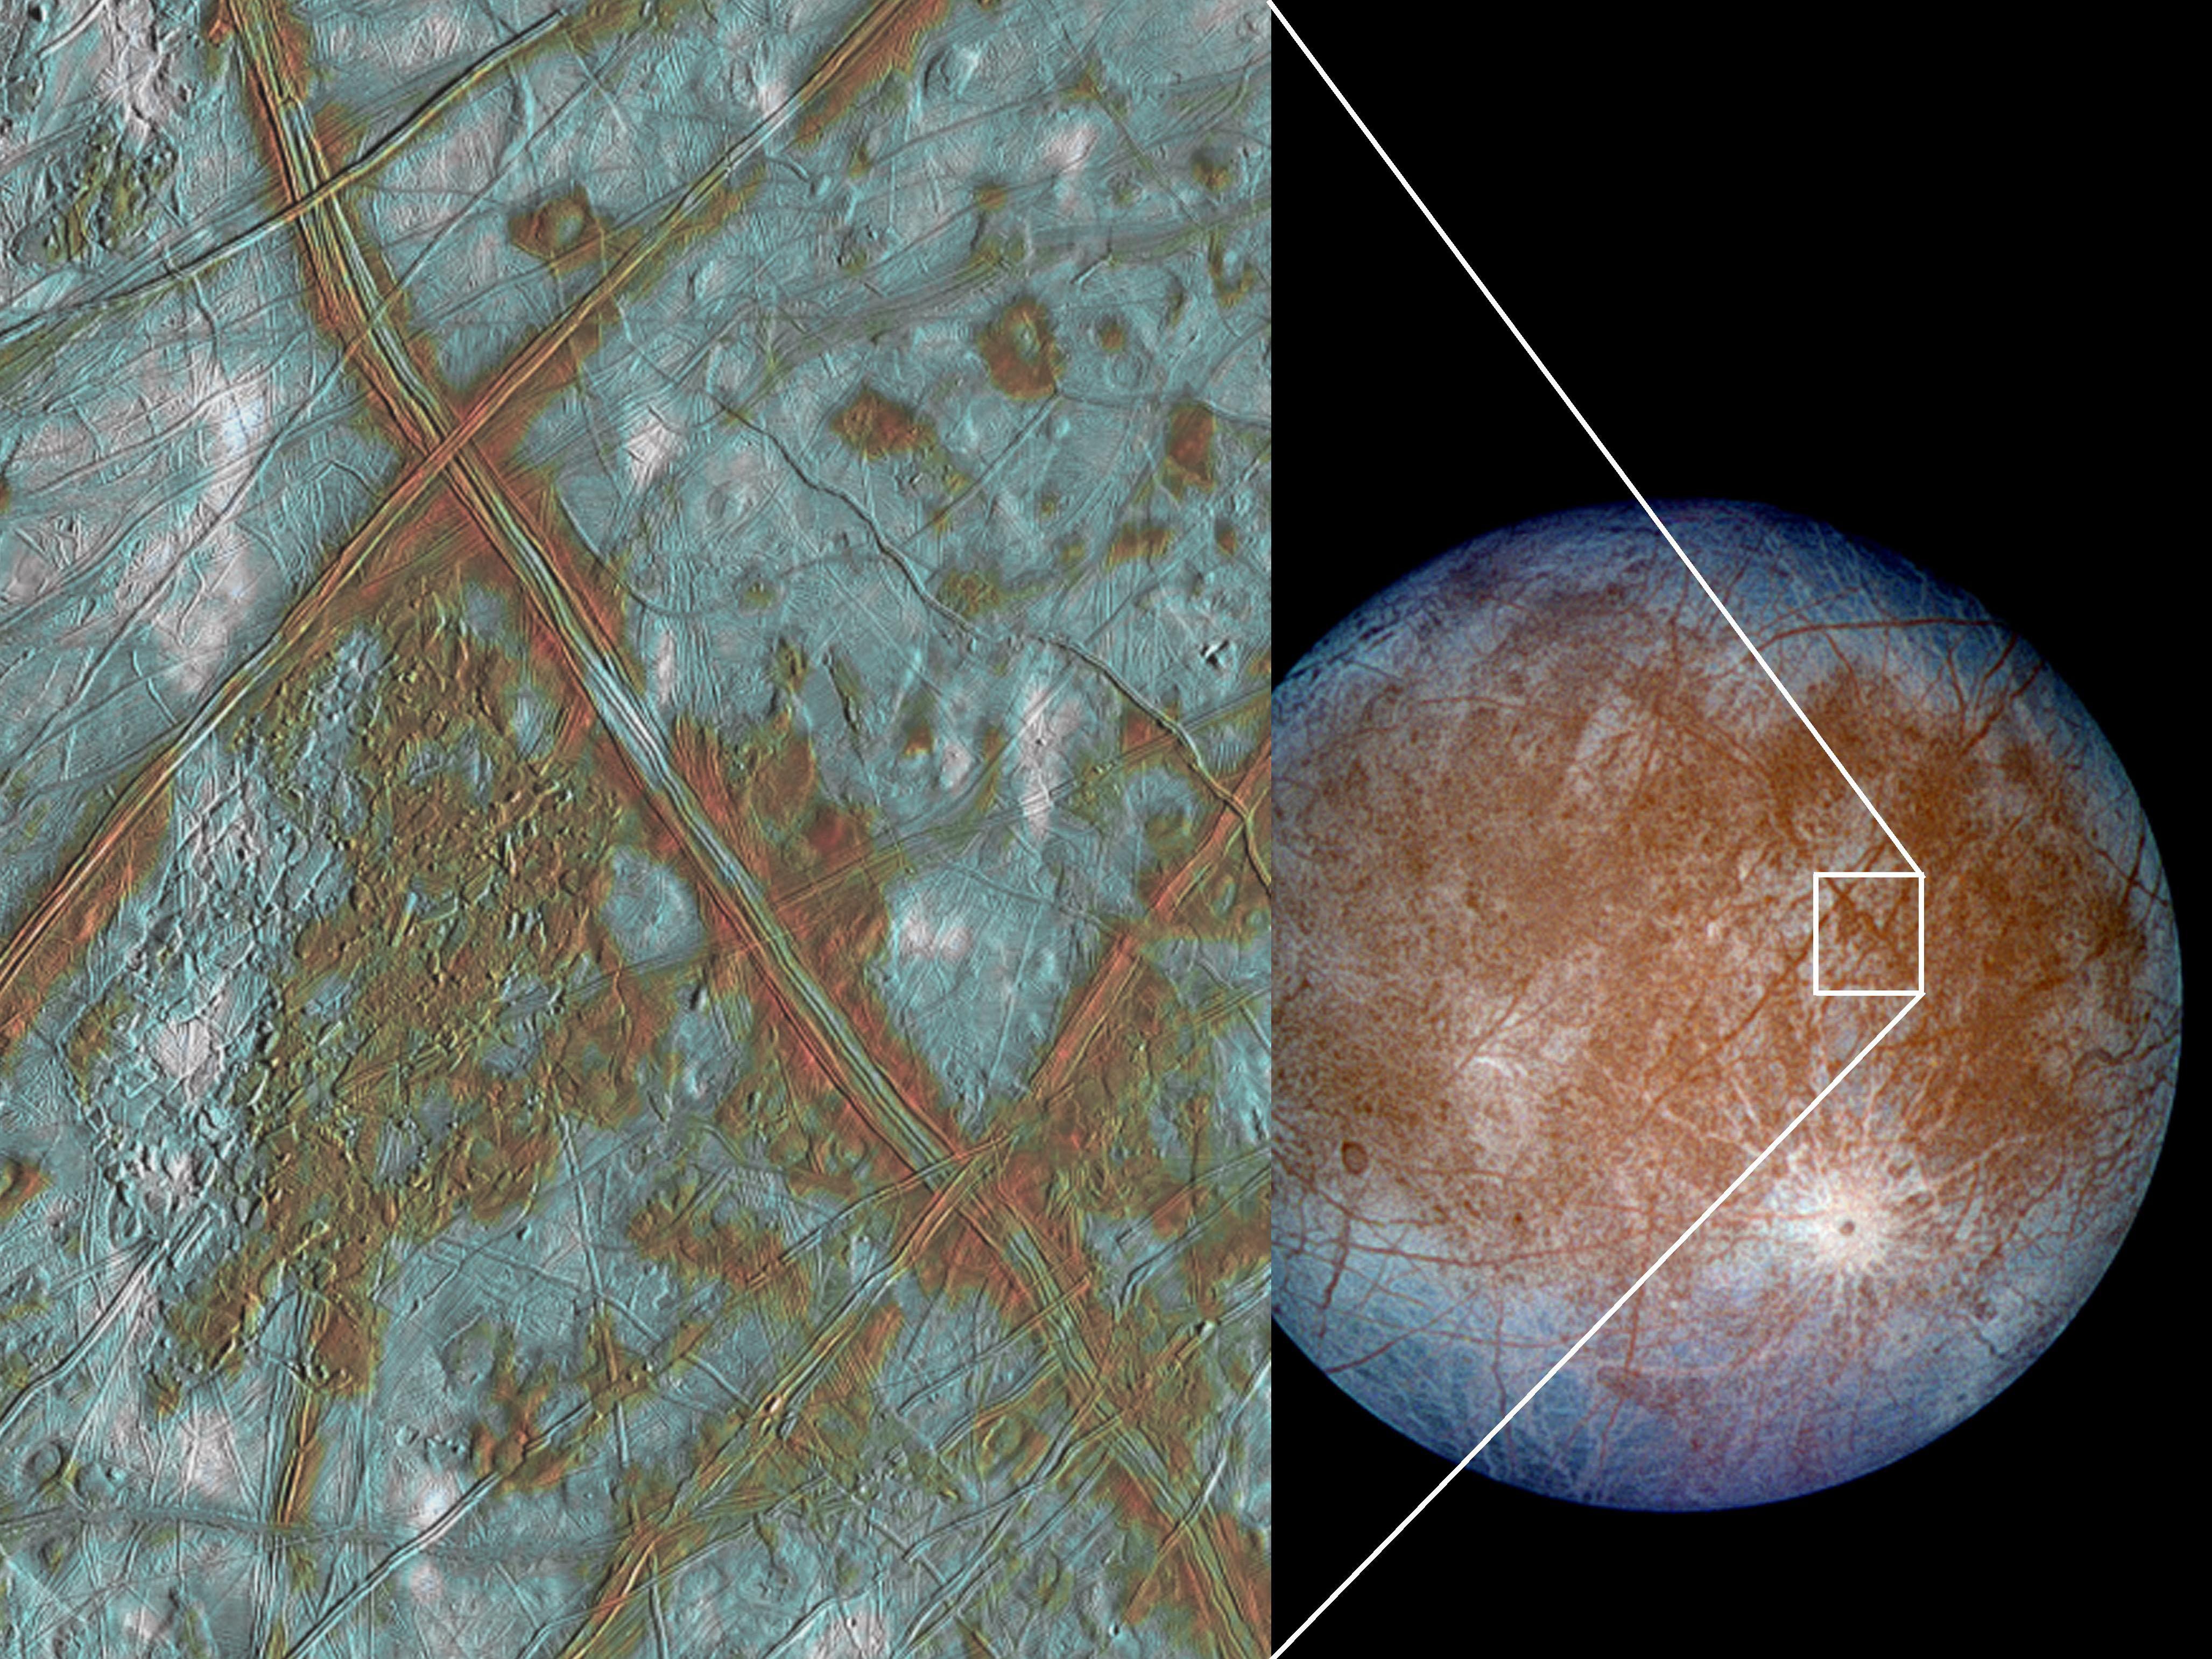 Color image of Europa showing a close of view of blocky terrain on the surface.